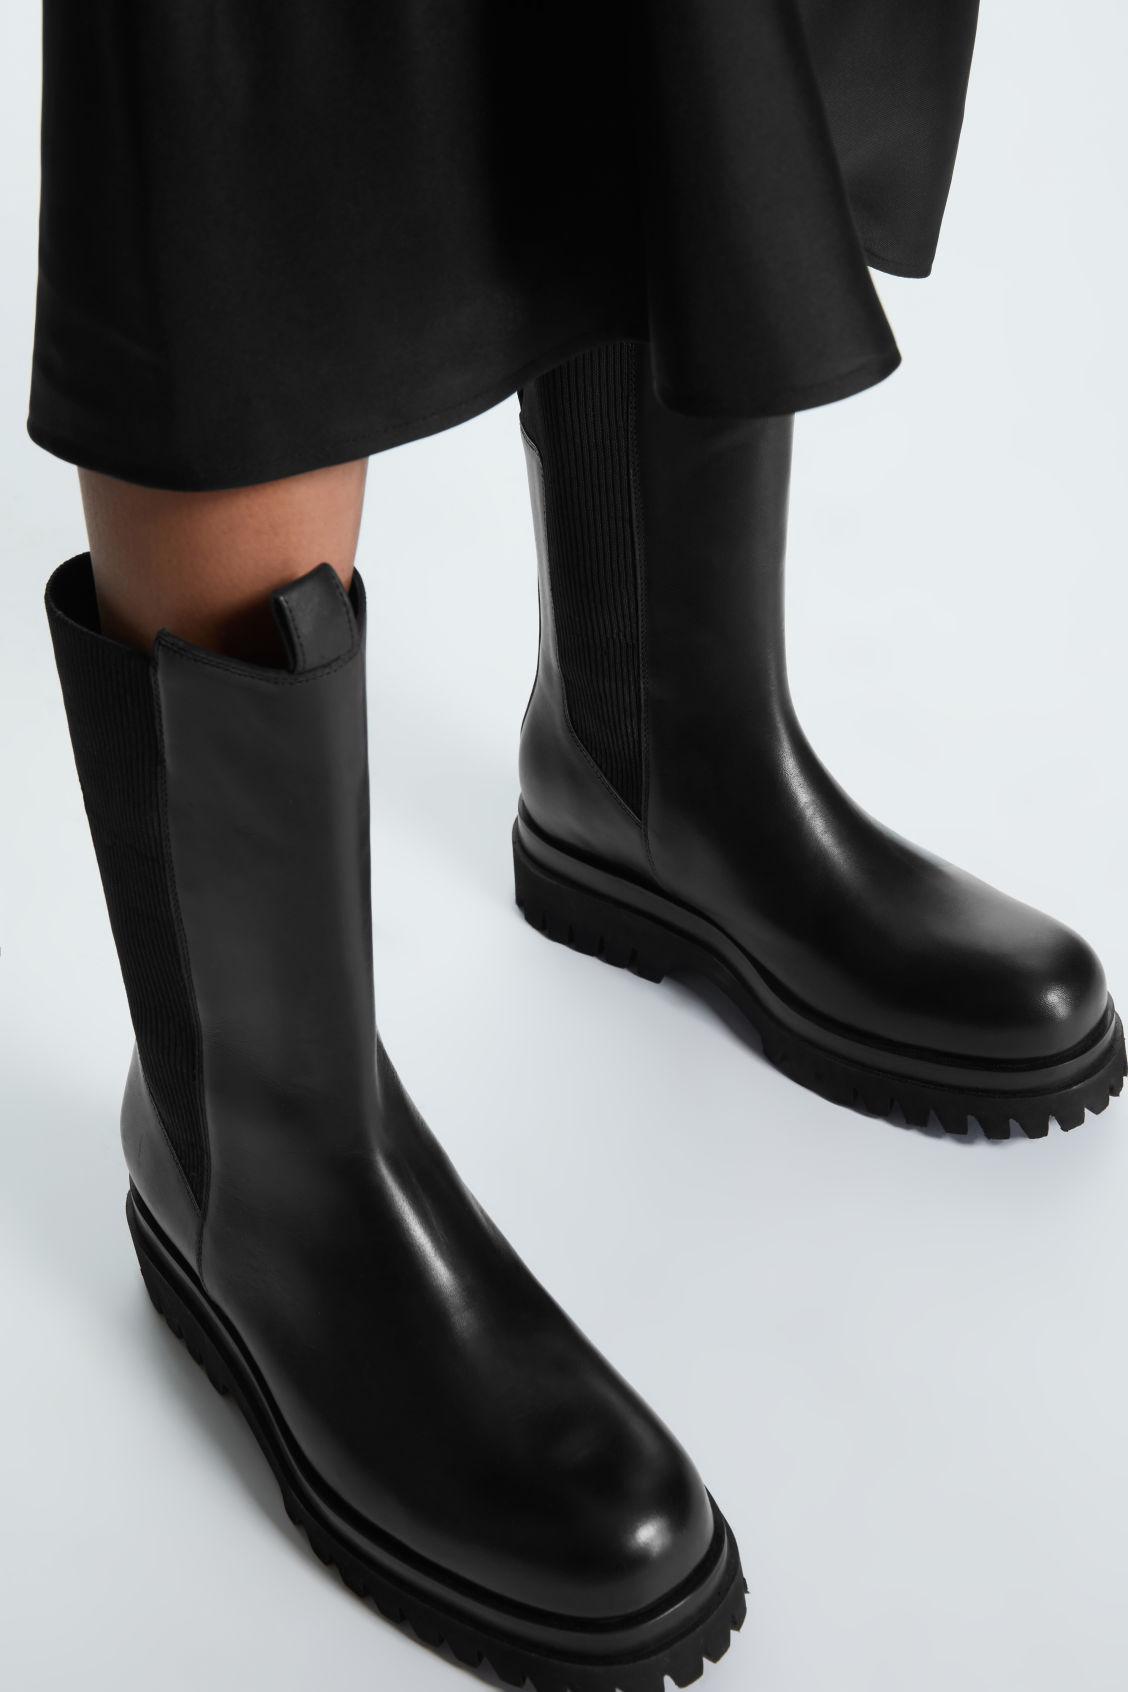 Duplikering Forenkle sort COS Chunky Leather Chelsea Boots in Black | Lyst